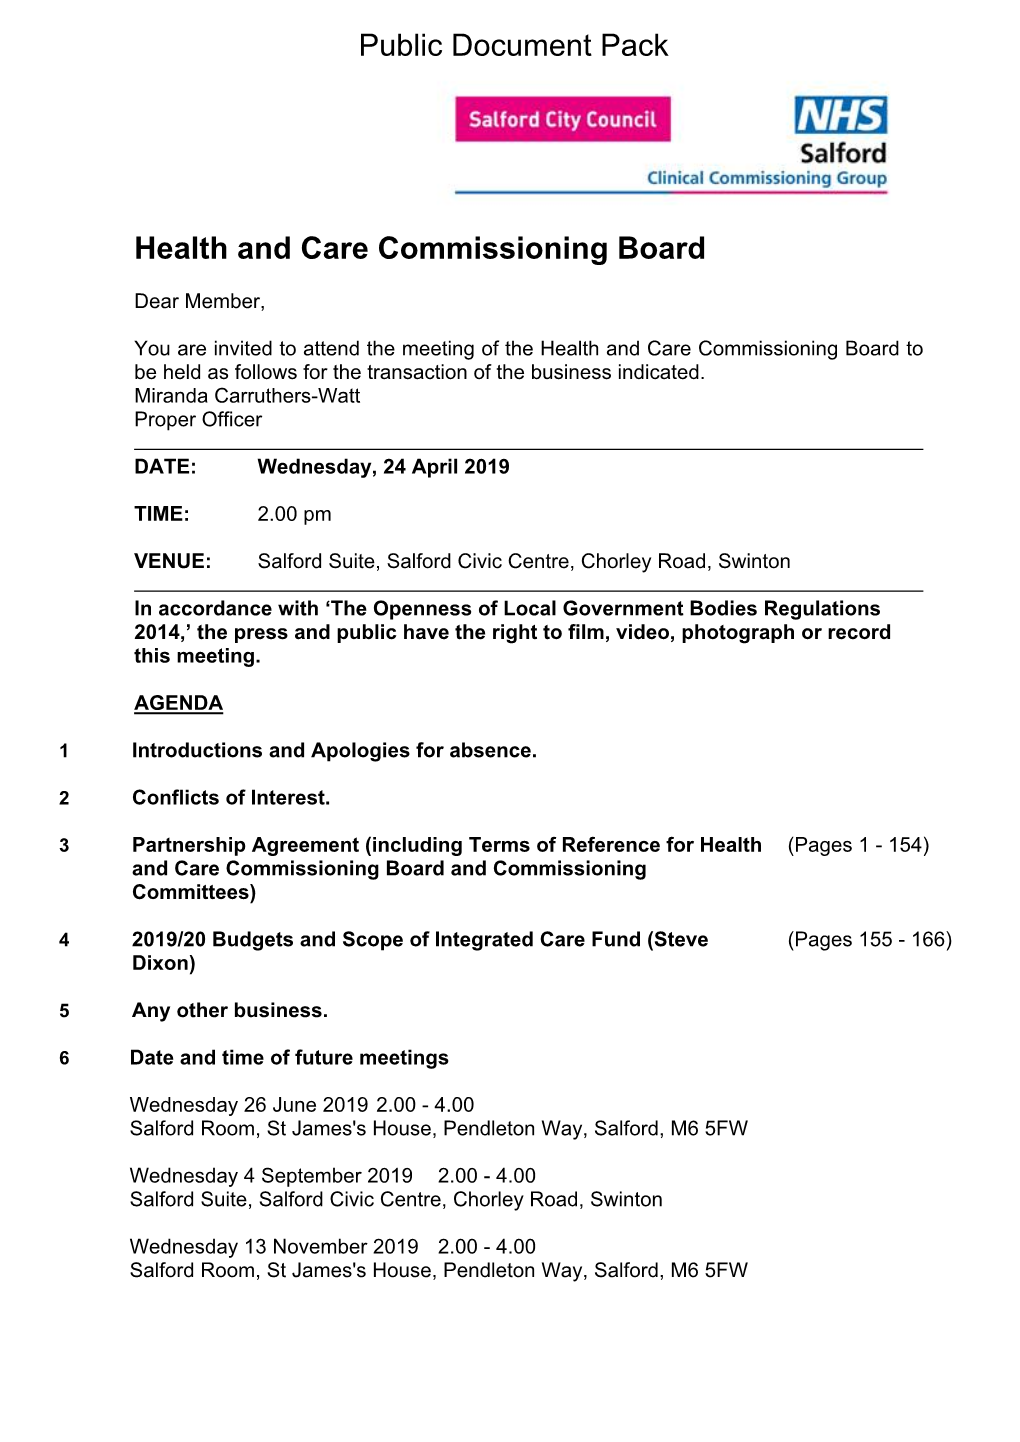 Health and Care Commissioning Board